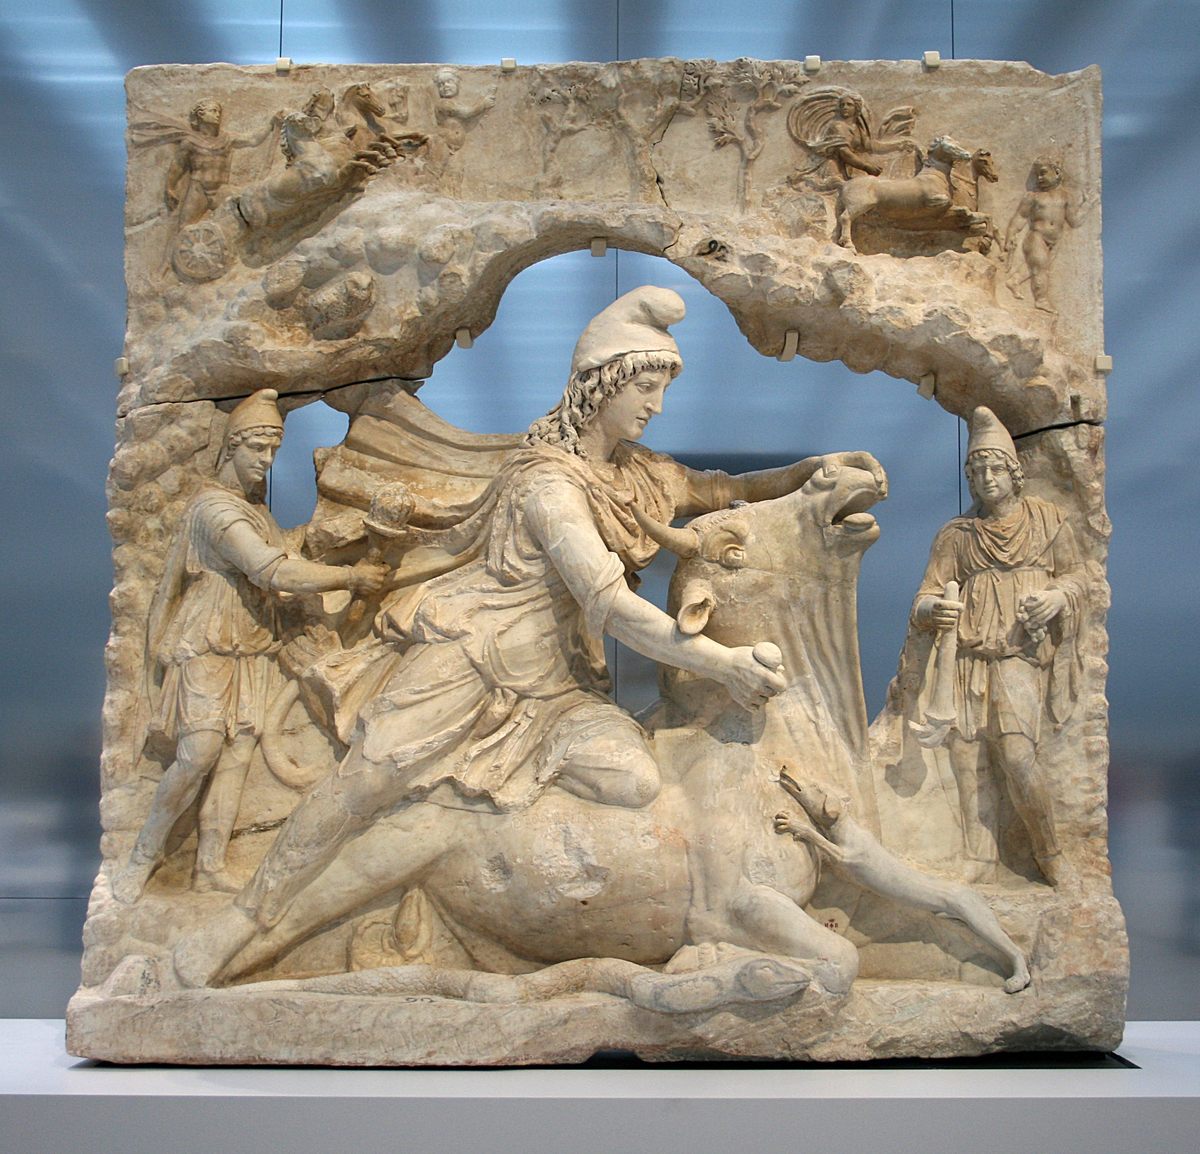 Mithraeum elements included a tauroctony, or depiction of Mithras sacrificing a bull.